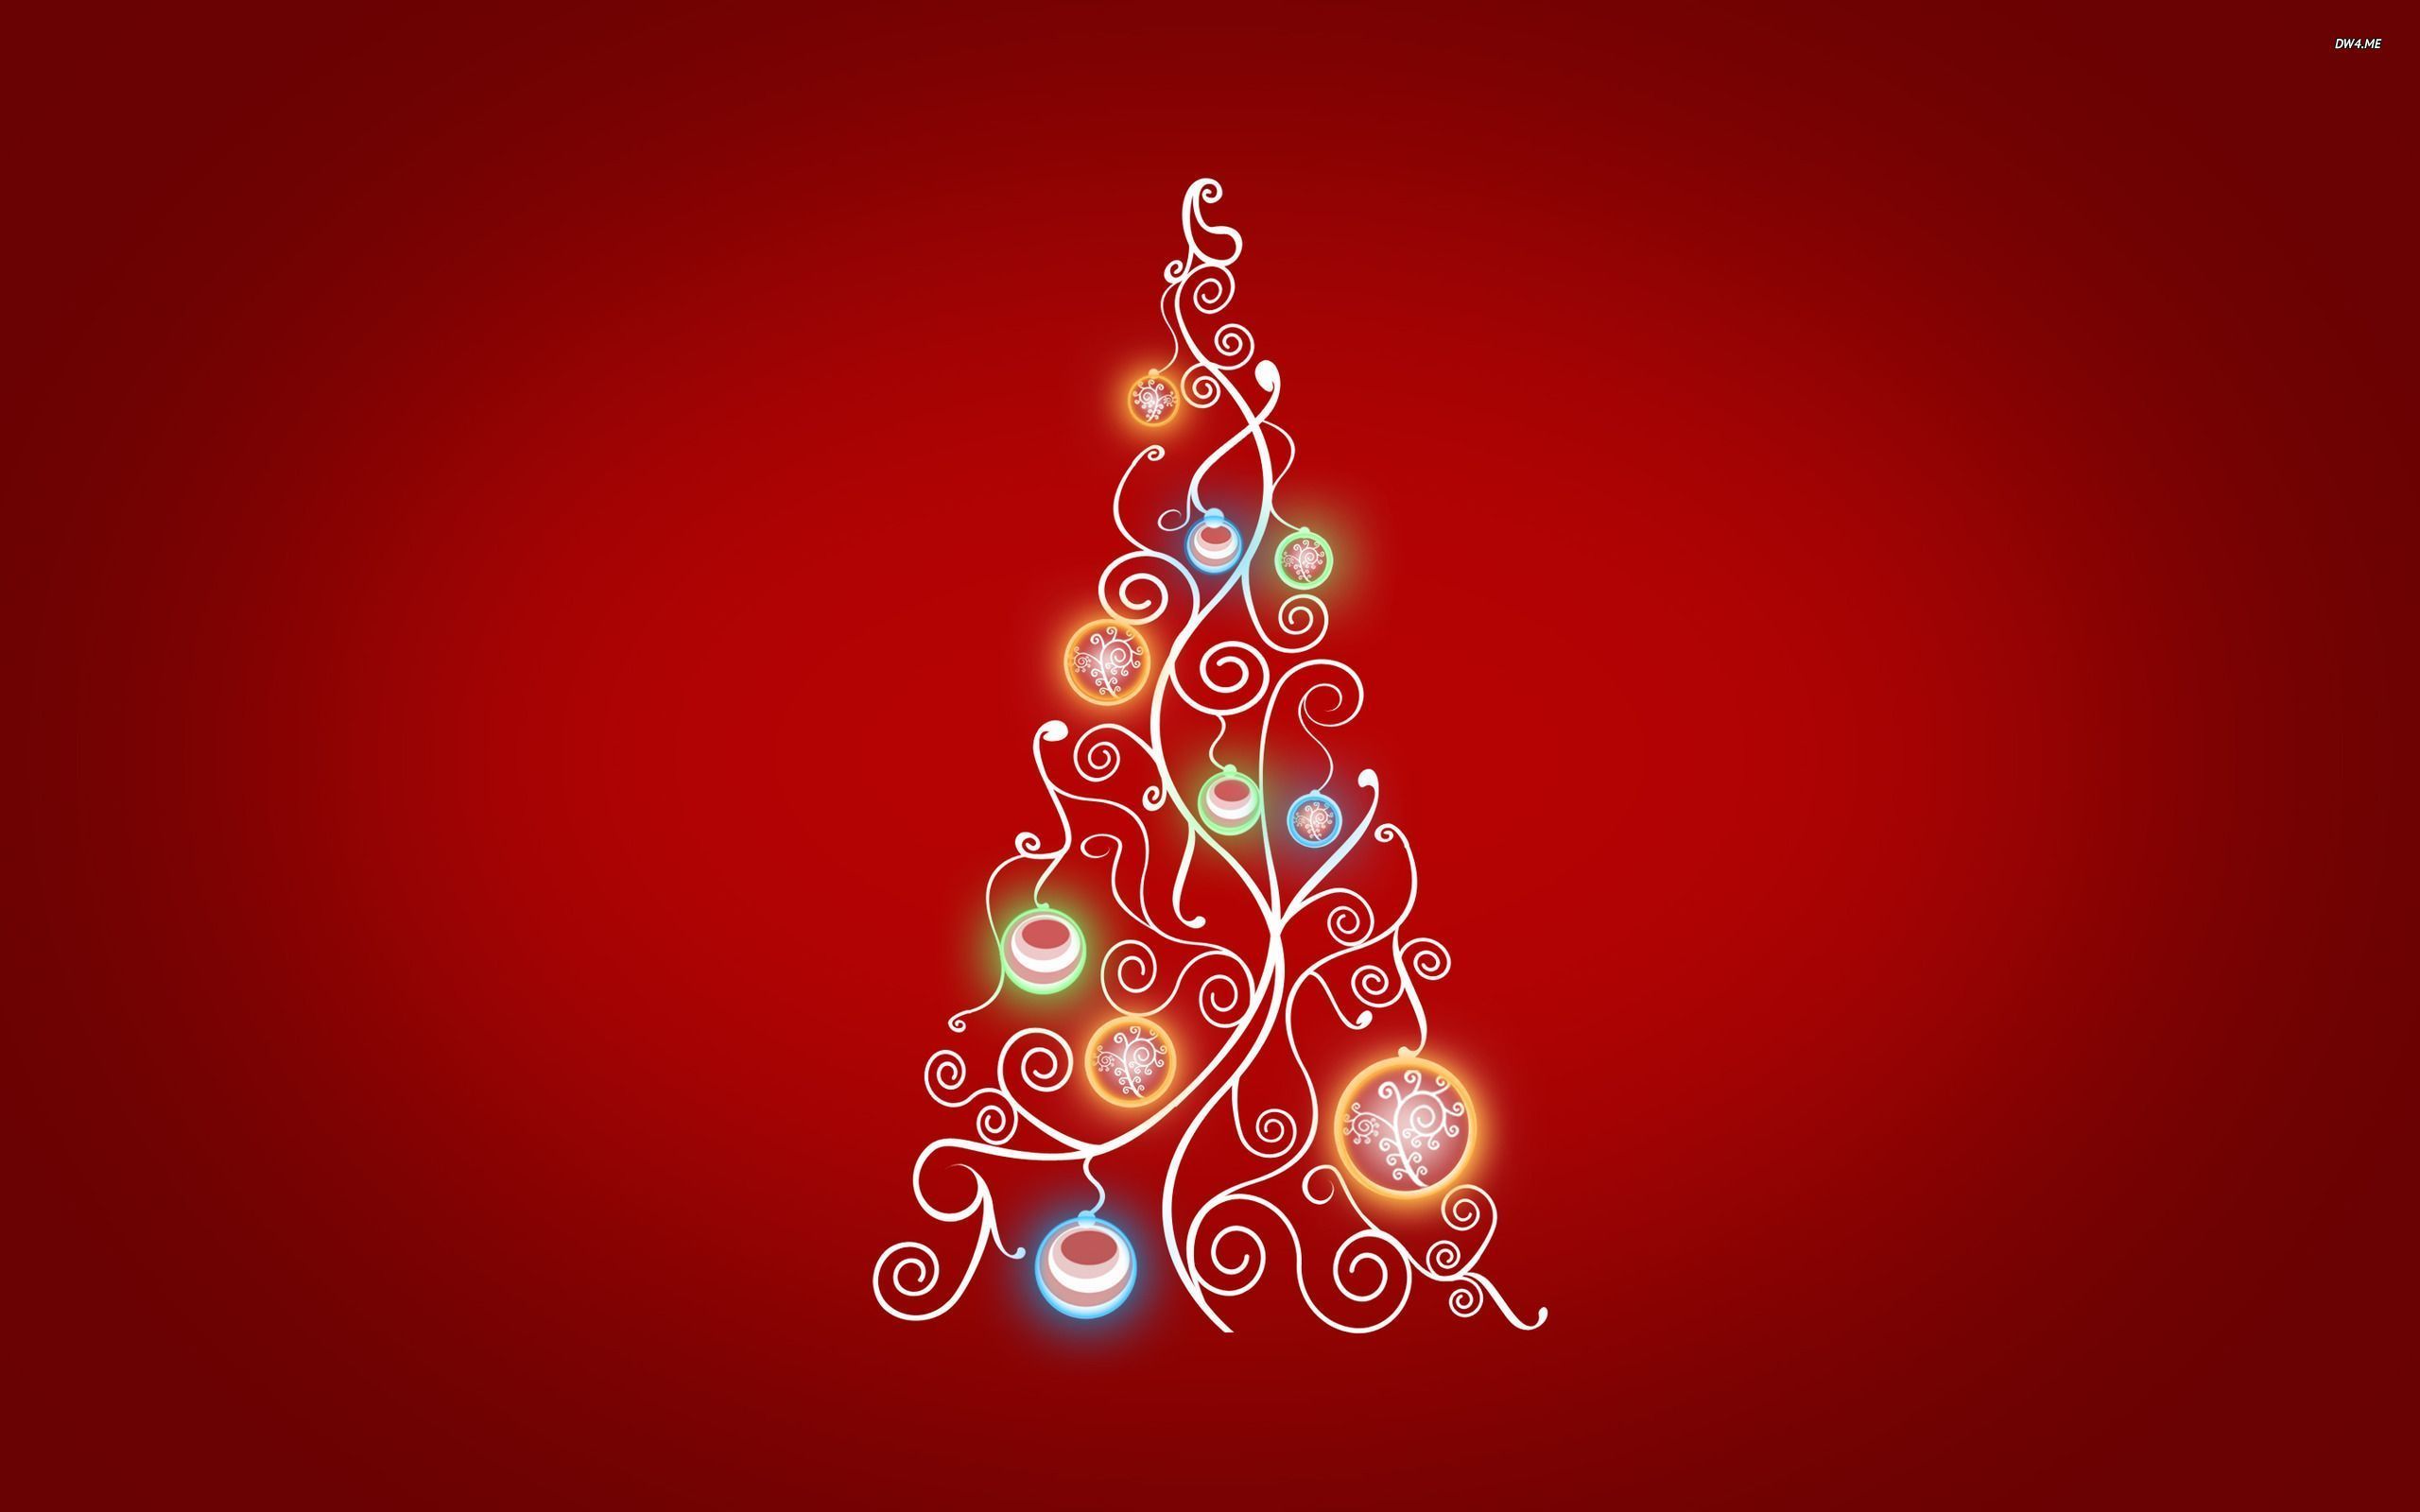 Stylized Christmas tree wallpaper - Holiday wallpapers - #972